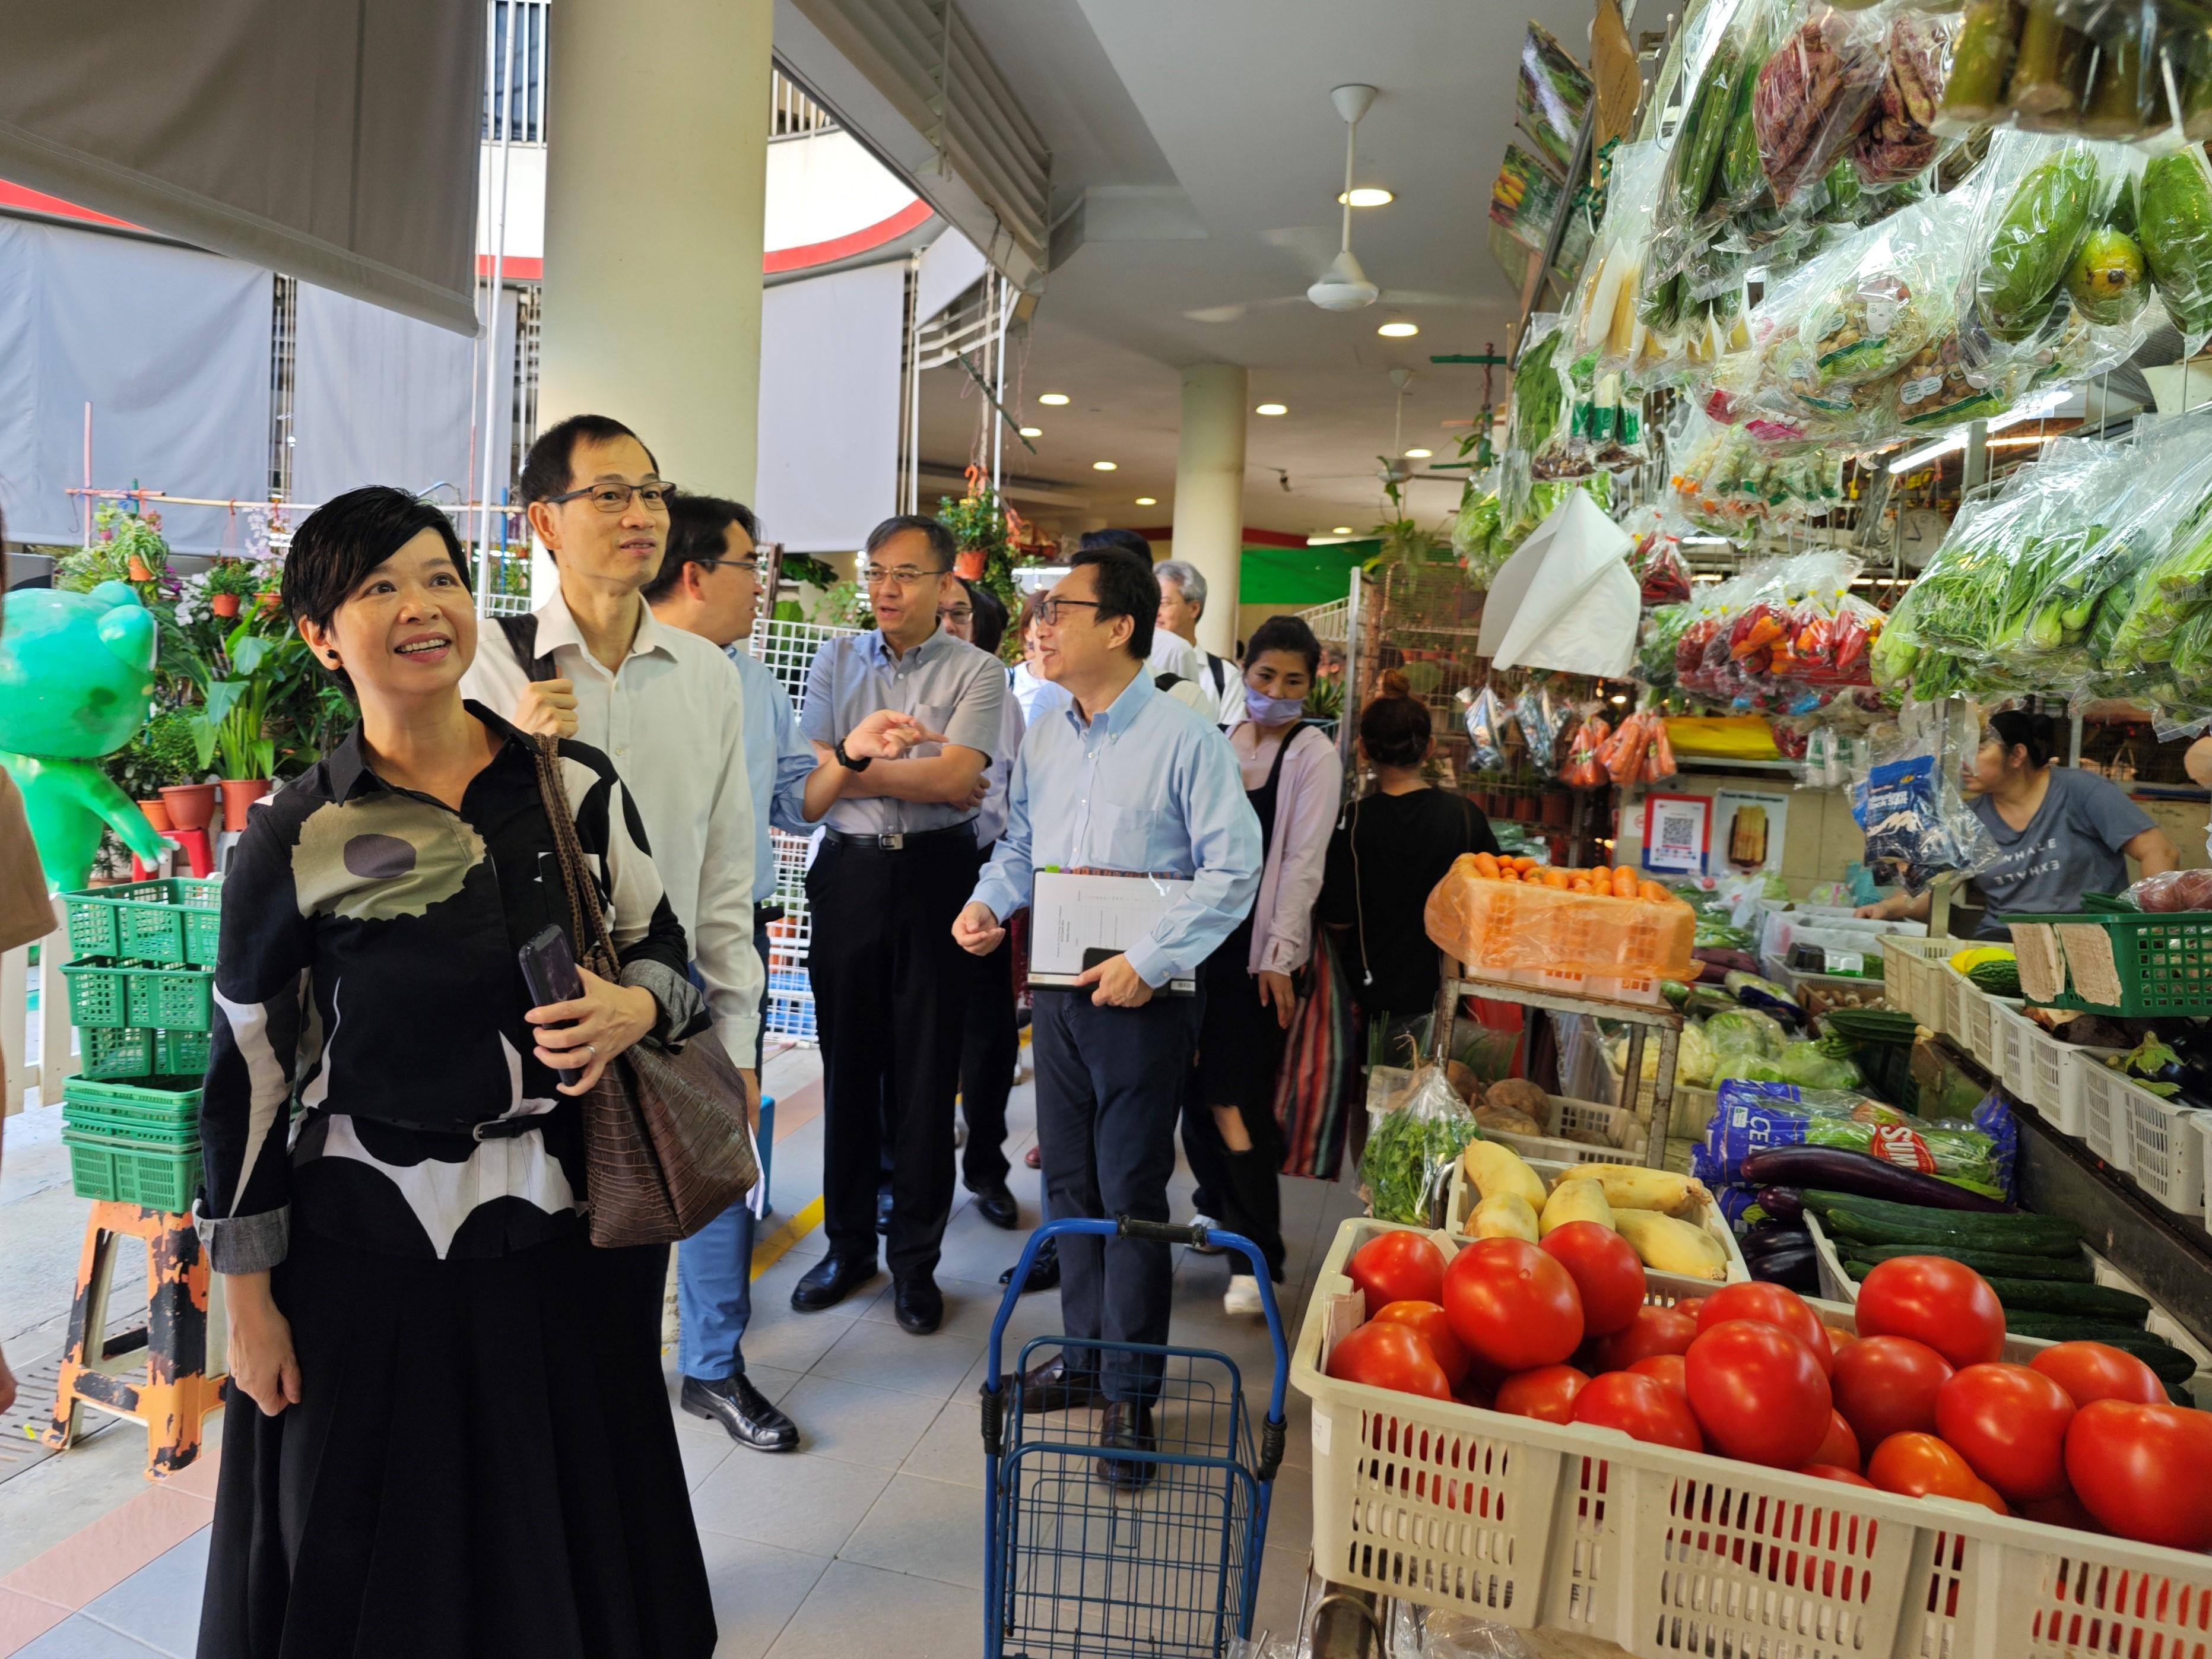 The Secretary for Housing, Ms Winnie Ho, began her visit to Singapore yesterday (August 22). She met with local government officials to exchange views in areas such as housing policies, innovative construction technologies and green building. Photo shows Ms Ho (first left) visiting the Tiong Bahru Market this morning (August 23).